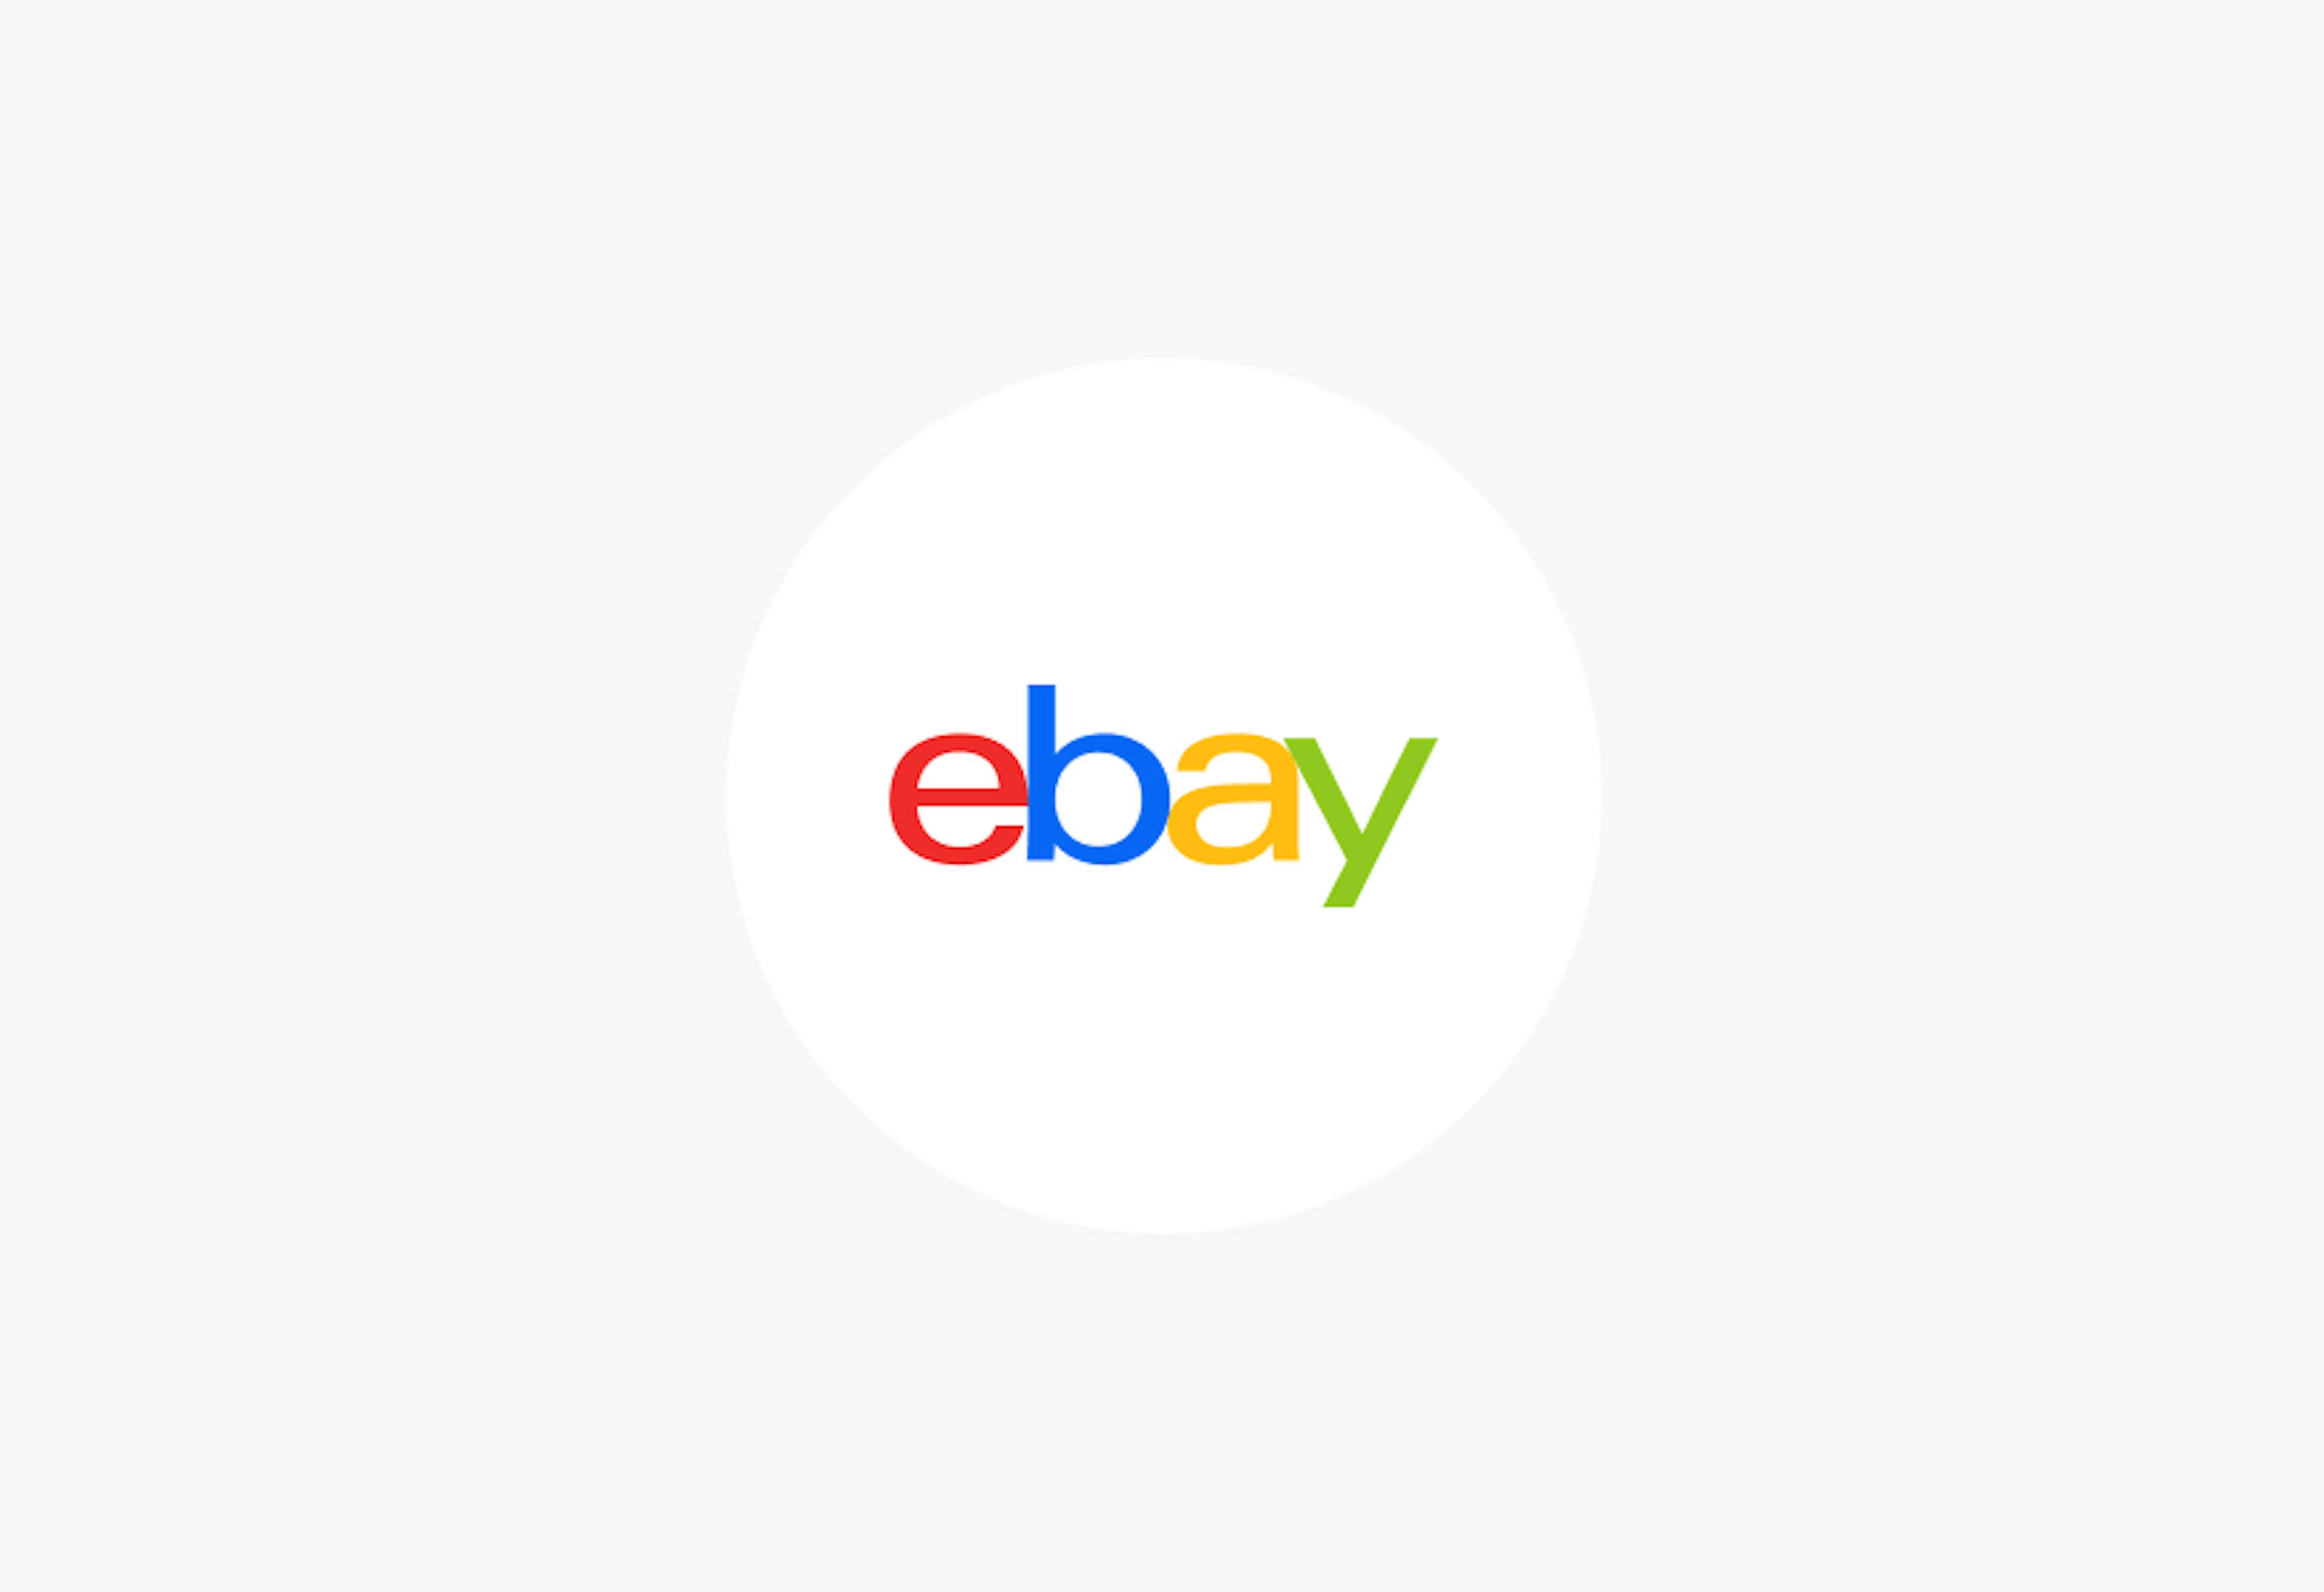 The colorful eBay logo in a white circle.